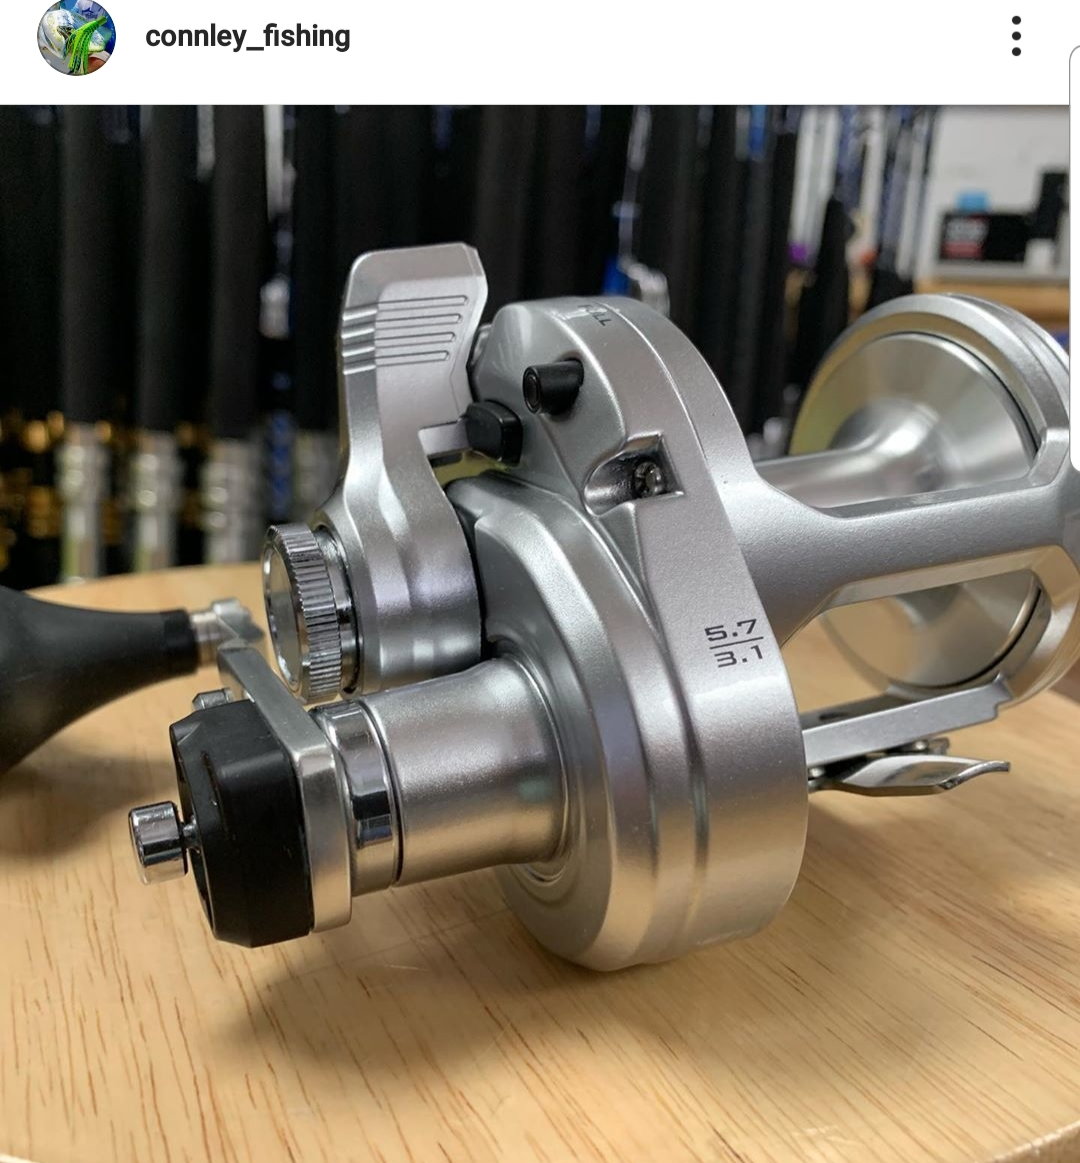 Shimano's New Speedmaster? - The Hull Truth - Boating and Fishing Forum